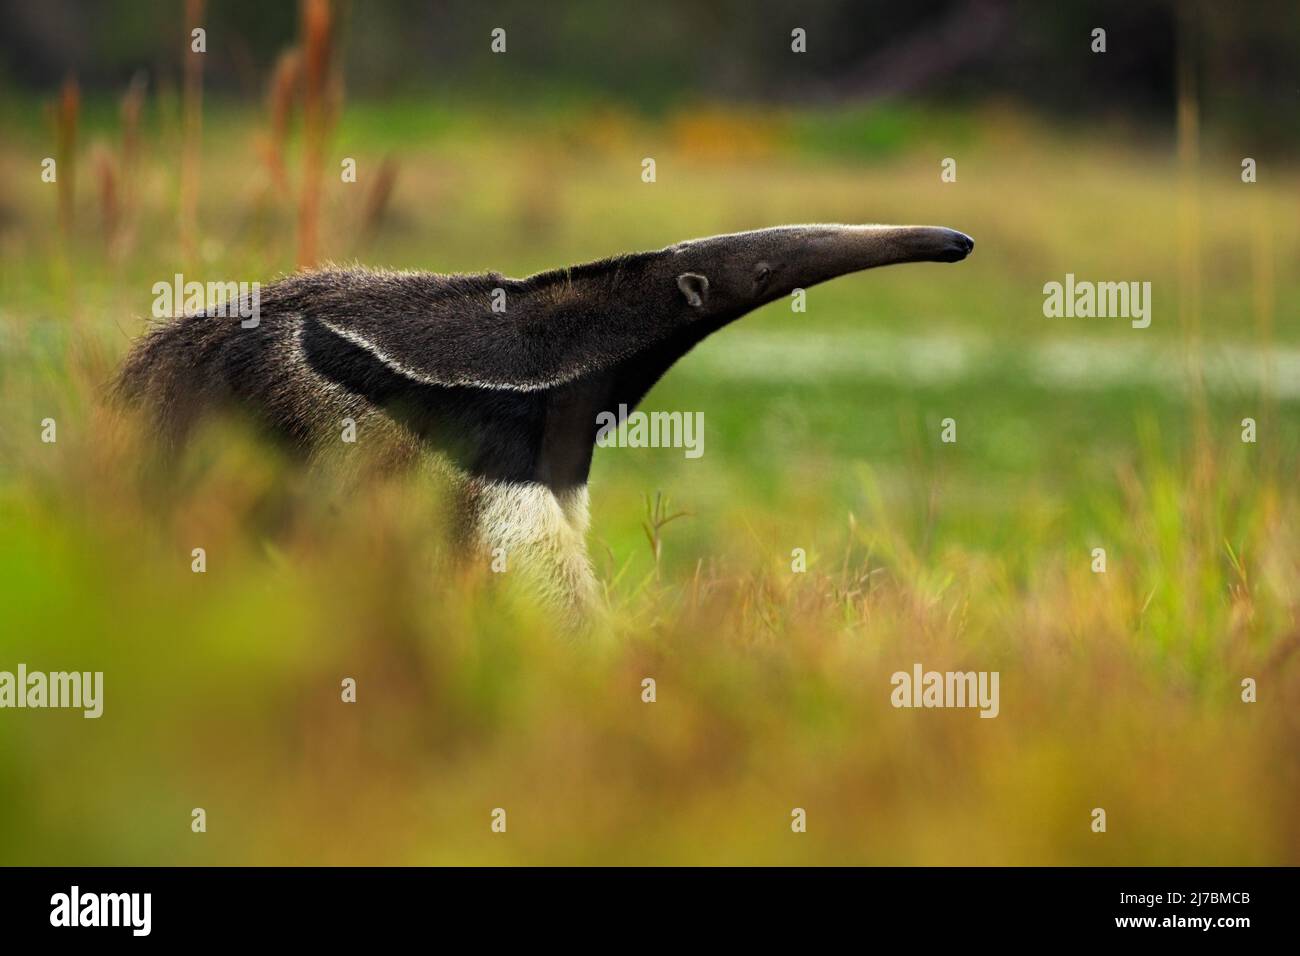 Giant Anteater, Myrmecophaga tridactyla, animal in nature habitat with long tail and very log nose, Pantanal, Brazil Stock Photo